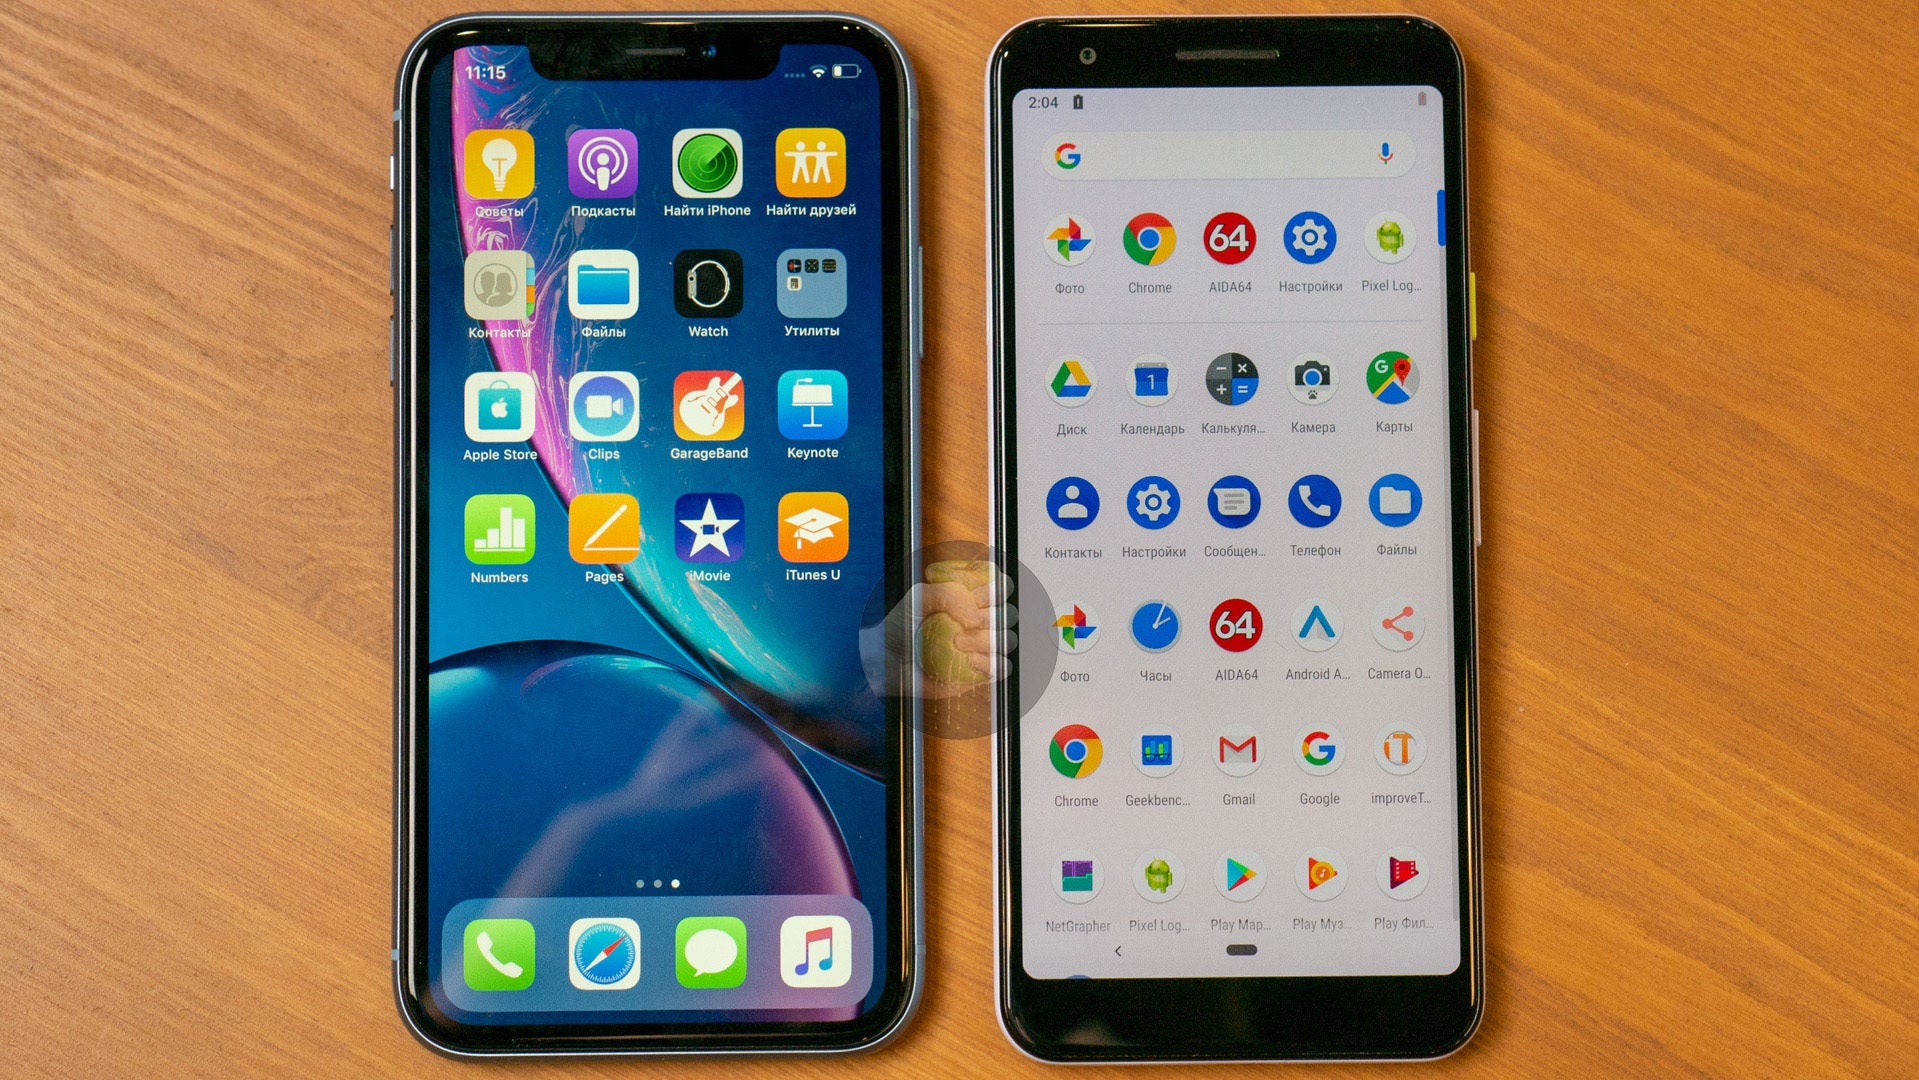 iPhone XR vs Google Pixel 3a; photo via Wylsa.com - Android boss teases "unreleased phone" - Google Pixel 3a may be launched soon